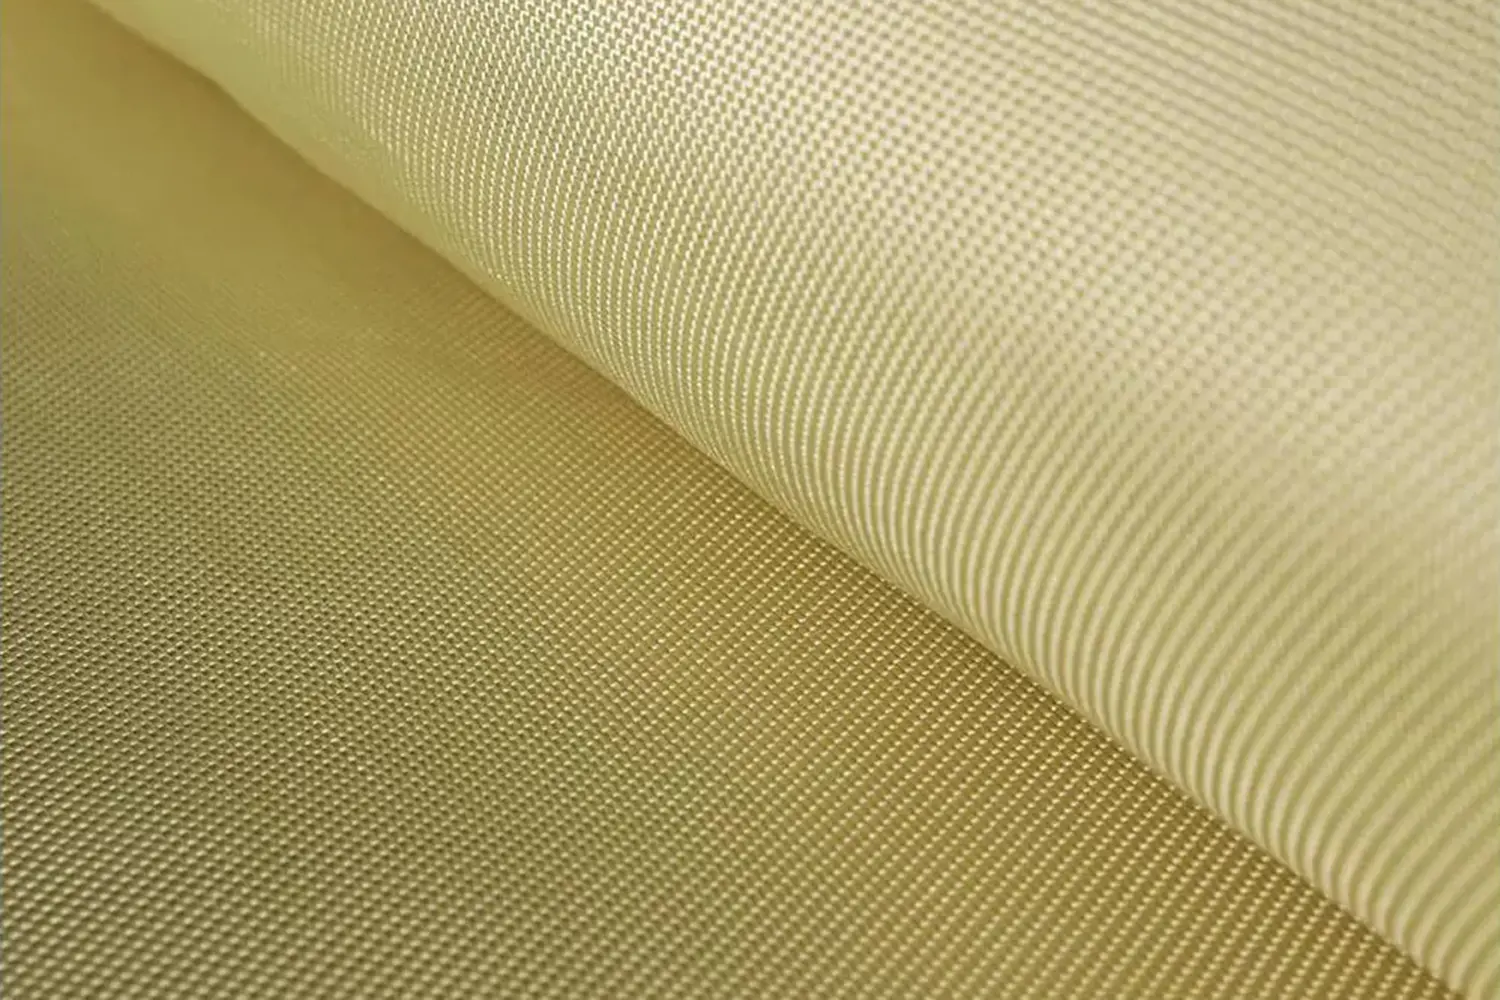 What is Kevlar®?